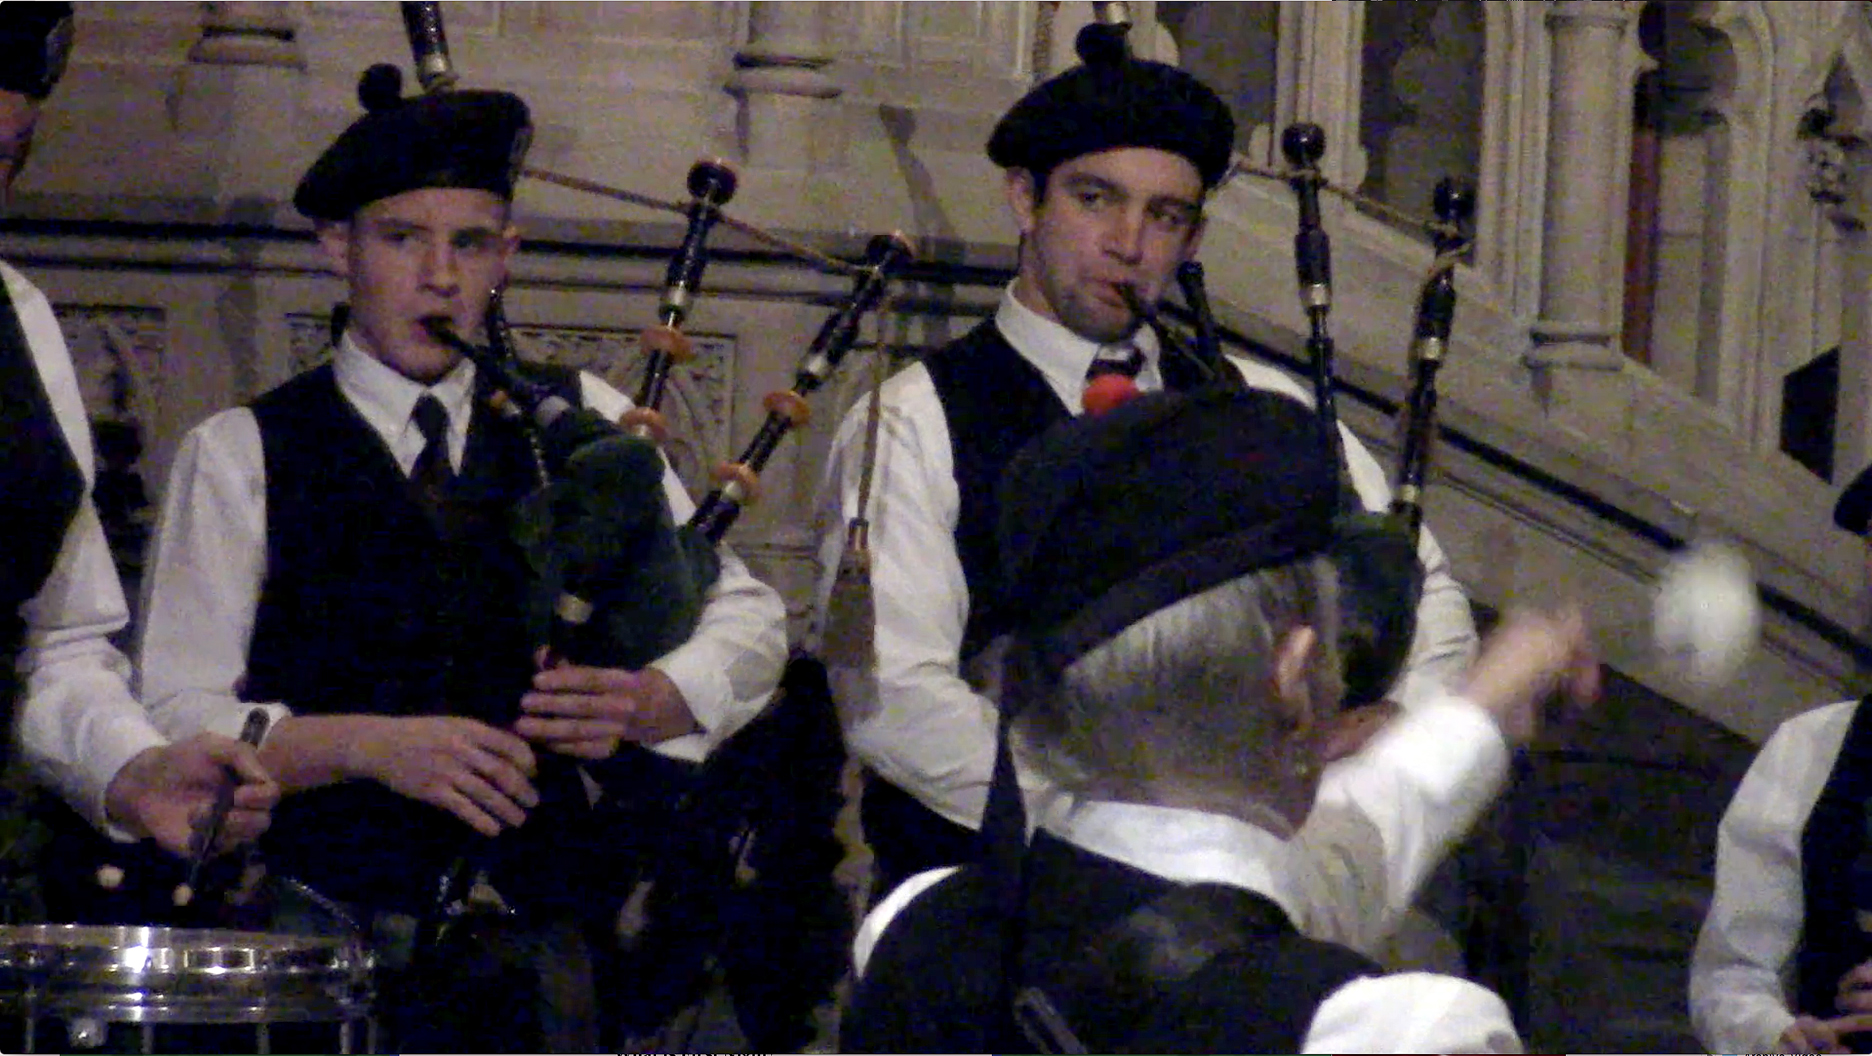 Ring in 2020 with Balmoral Pipes & Drums at Pittsburgh's 1st Night celebration!